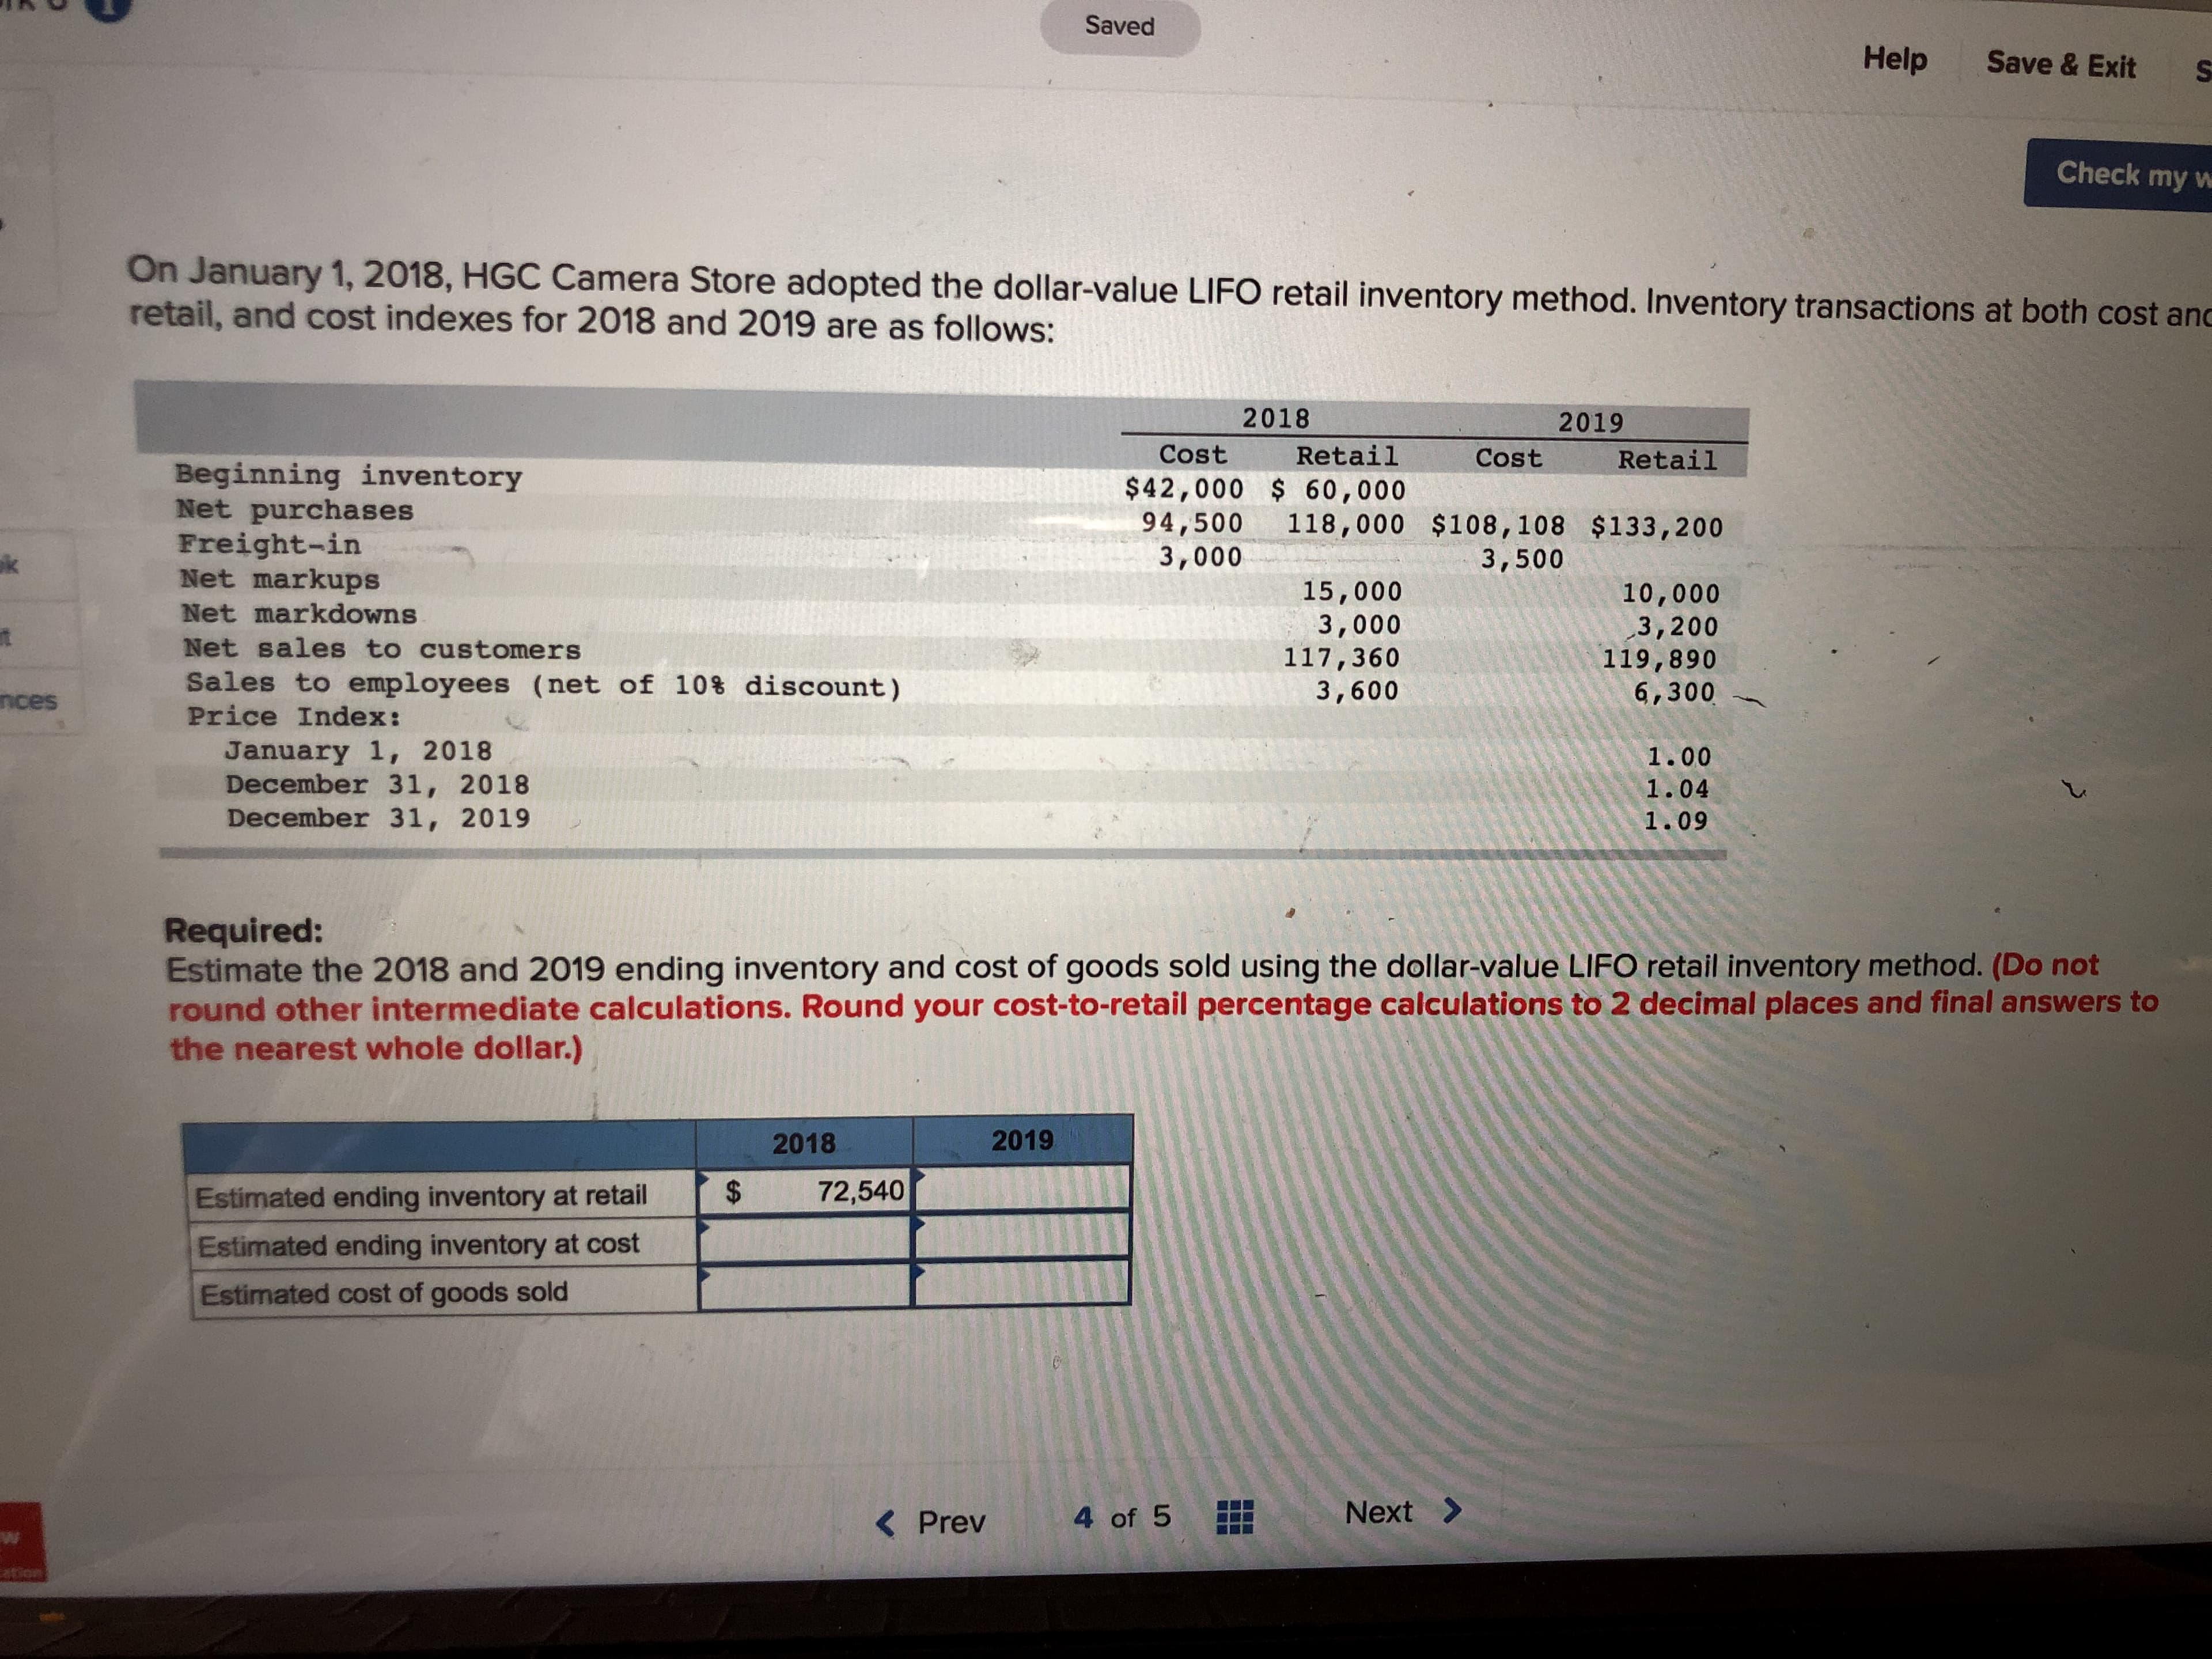 Saved
Help Save & Exit S
Check my w
On January 1, 2018, HGC Camera Sto
retail, and cost indexes for 2018 and 2019 are as follows
re adopted the dollar-value LIFO retail inventory method. Inventory transactions at both cost an
2018
Cost Retail
2019
Cost Retail
Beginning inventory
Net purchases
Freight-in
Net markups
Net markdowns
Net sales to customers
sales to employees (net of 10% discount)
Price Index:
$42,000 60,000
94,500 118,000 $108,108 $133,200
3,000
3,500
15,000
3,000
117,360
3,600
10,000
3,200
119,890
6,300
nces
January 1, 2018
December 31, 2018
December 31, 2019
1.00
1.04
1.09
Required:
Estimate the 2018 and 2019 ending inventory and cost of goods sold using the dollar-value LIFO retail inventory method. (Do not
round other intermediate calculations. Round your cost-to-retail percentage calculations to 2 decimal places and final answers to
the nearest whole dollar.)
2018
2019
Estimated ending inventory at retail72,540
Estimated ending inventory at cost
Estimated cost of goods sold
< Prev
4of 5
Next >
